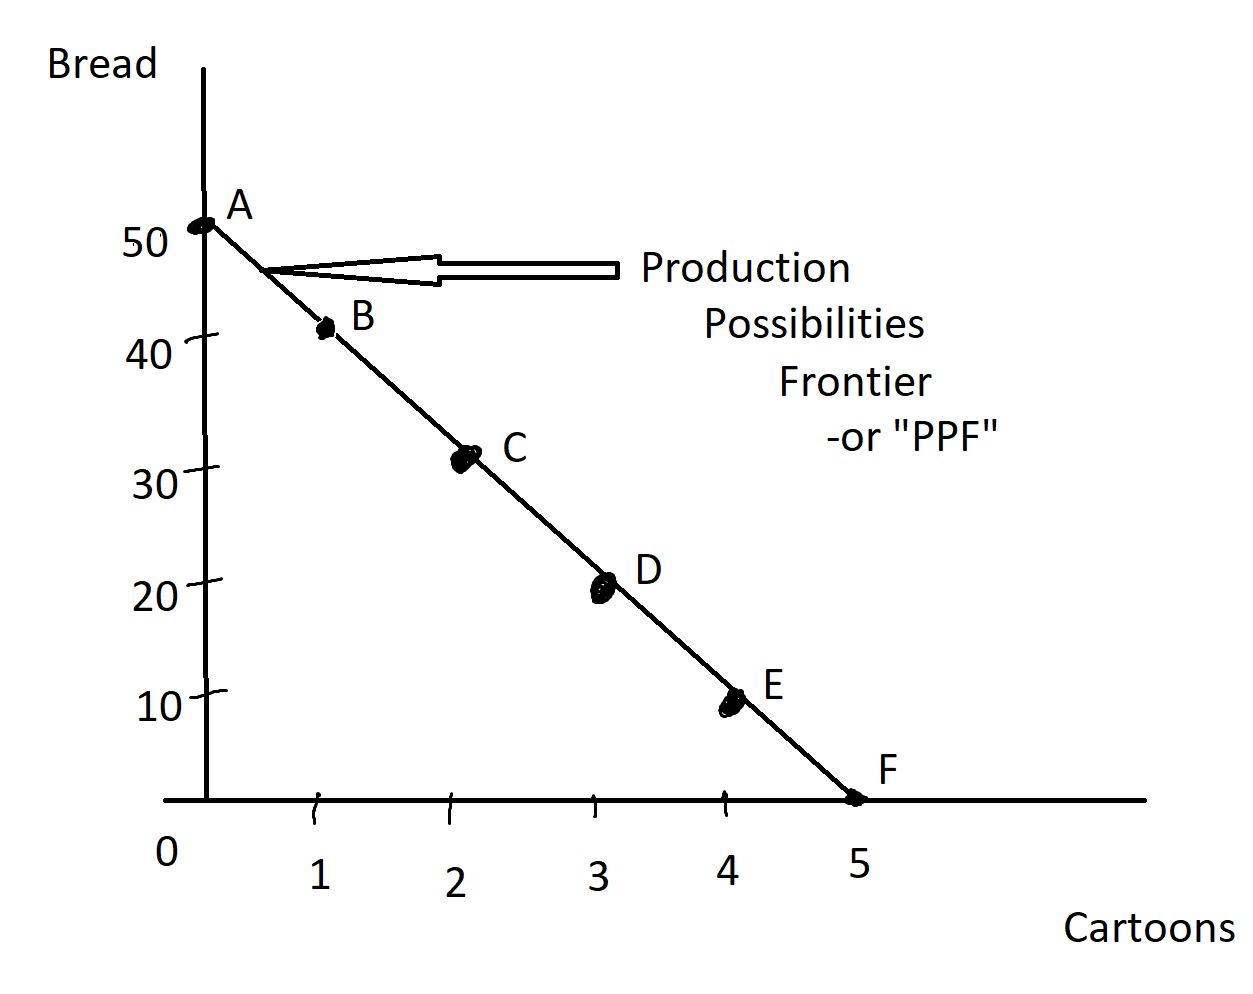 A linear PPF is shown, with bread on the vertical axis and cartoons on the horizontal axis.  The PPF hits the bread axis at 50 and hits the cartoons axis at 5.  There are 6 points on the PPF, labeled A, B, C, D, E, and F.